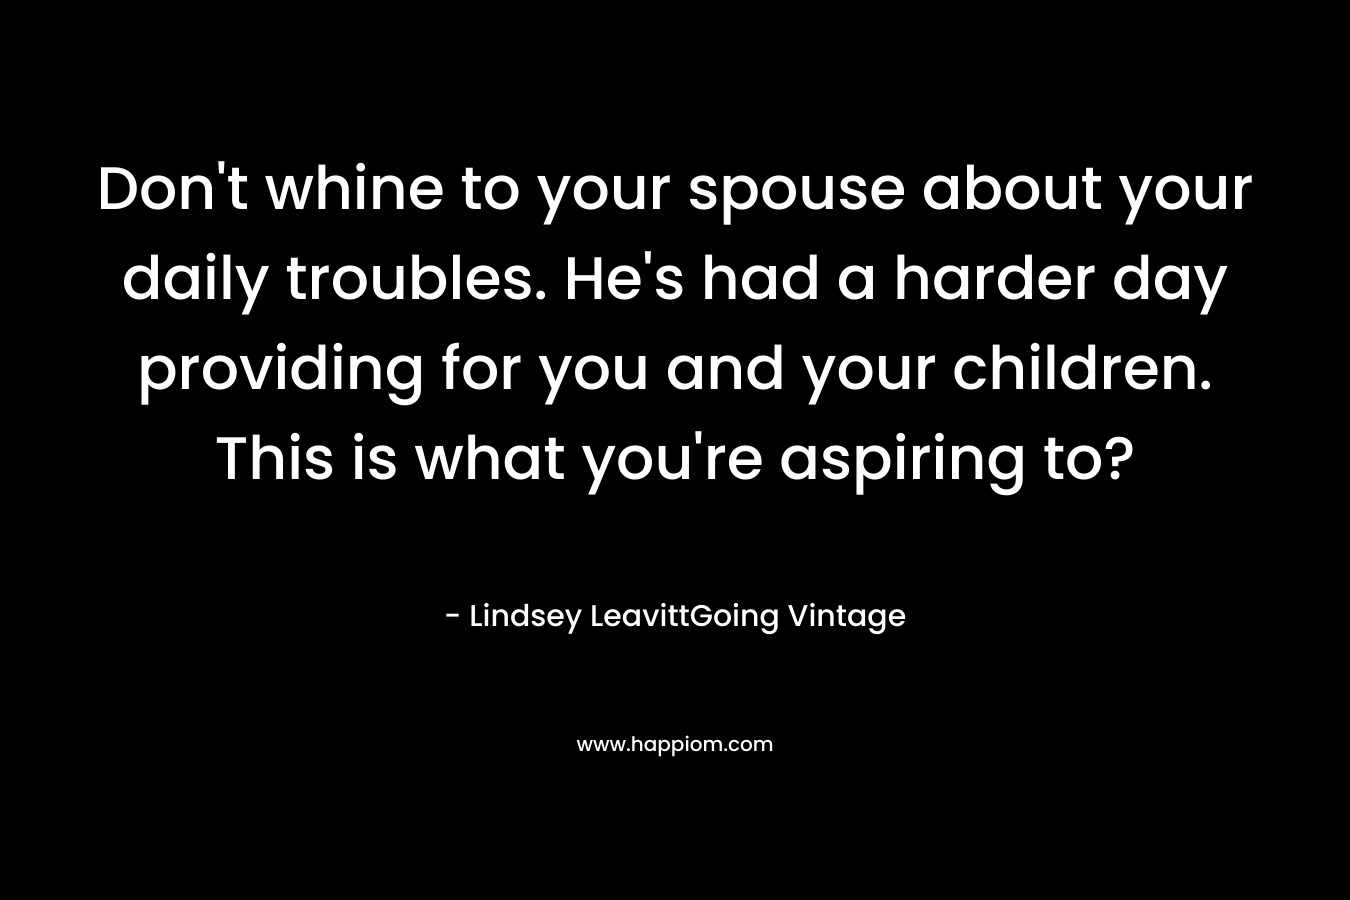 Don’t whine to your spouse about your daily troubles. He’s had a harder day providing for you and your children. This is what you’re aspiring to? – Lindsey LeavittGoing Vintage